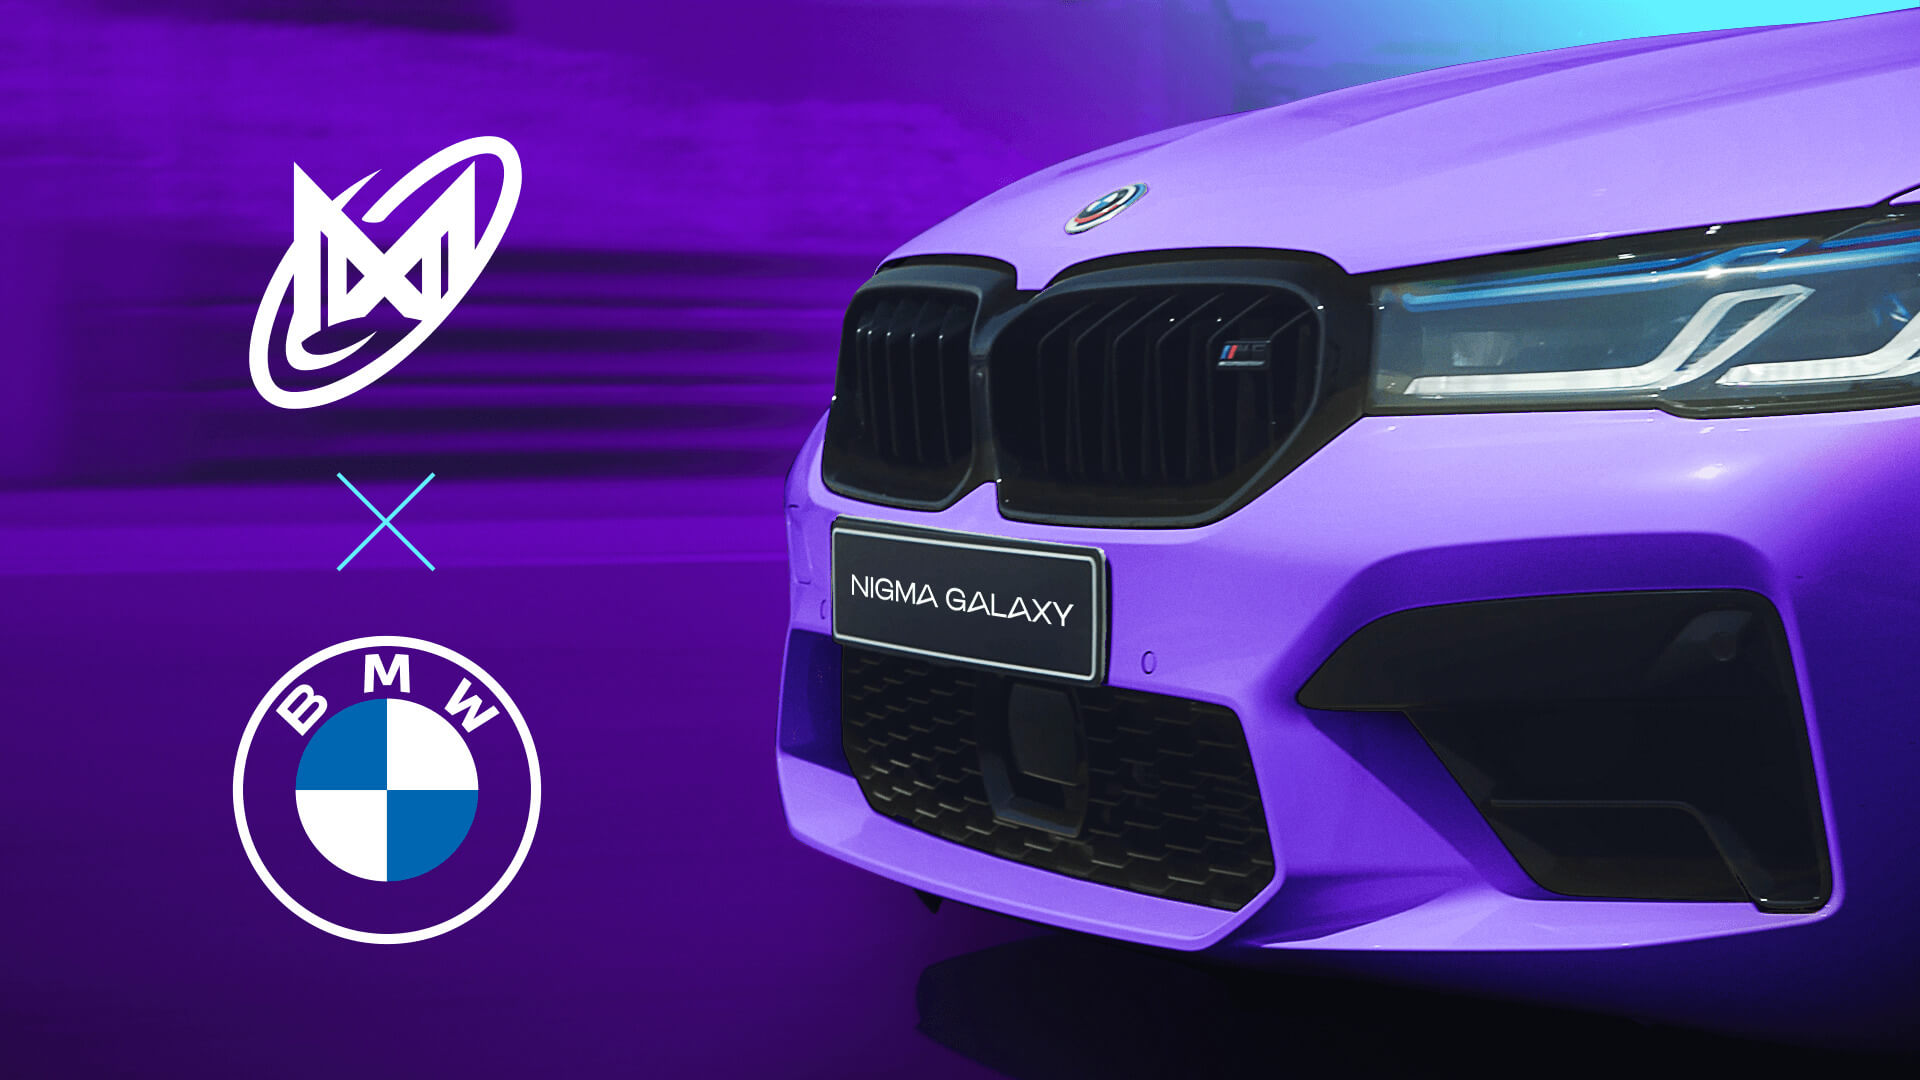 BMW Group Middle East (iconic premium automotive manufacturer) is delighted to unveil its partnership with Nigma Galaxy.